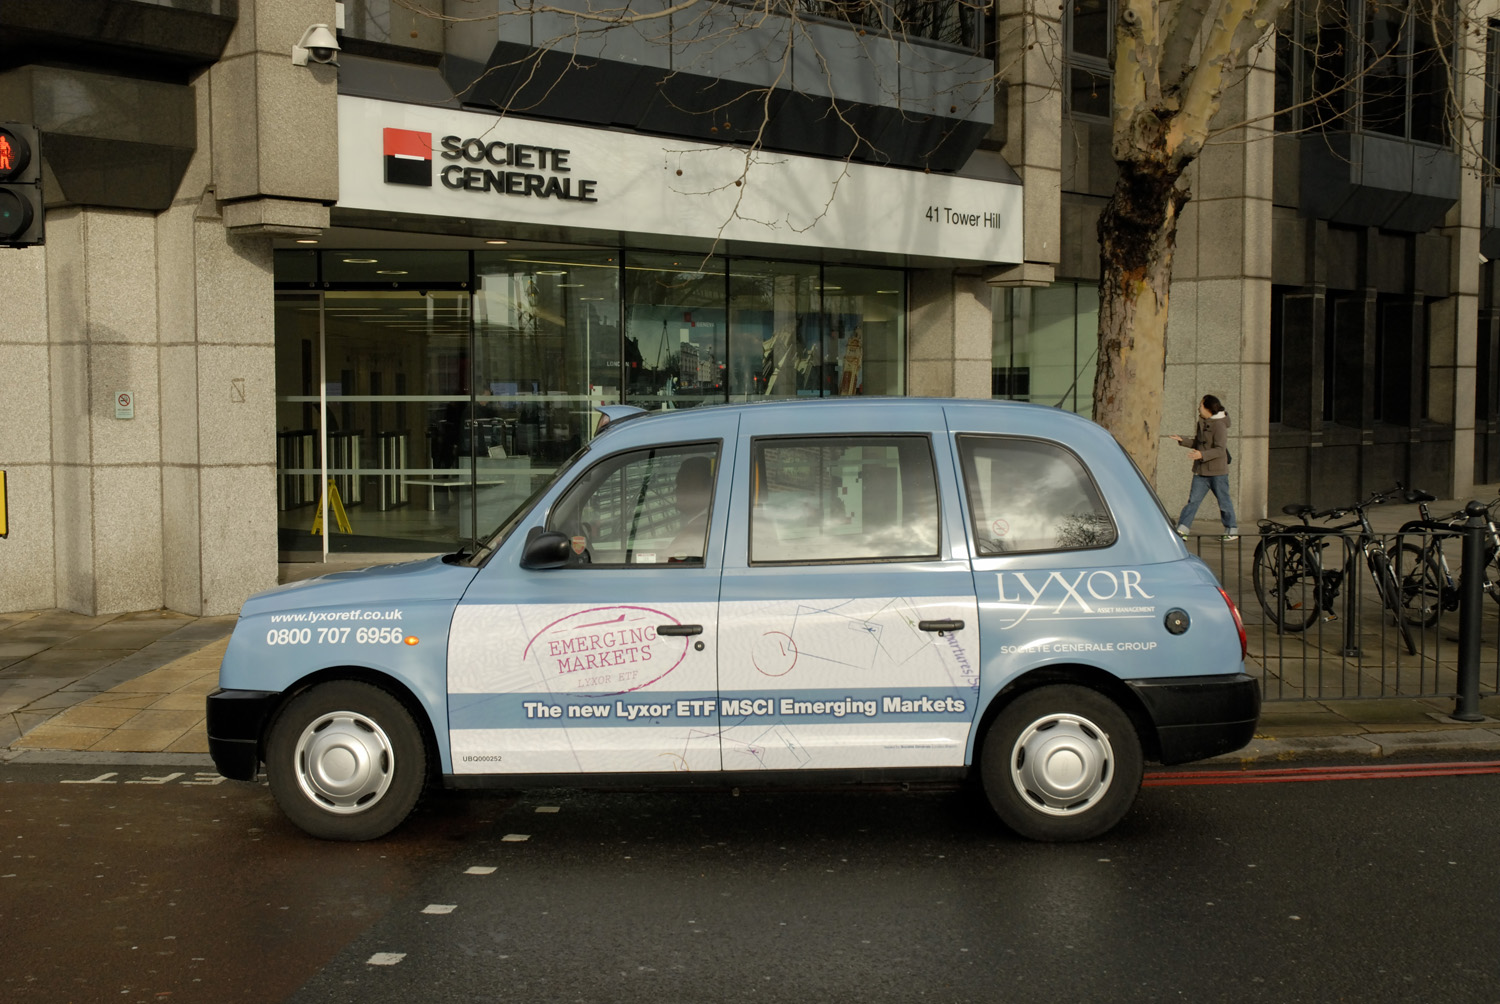 2007 Ubiquitous taxi advertising campaign for Societe Generale - The New Lyxor